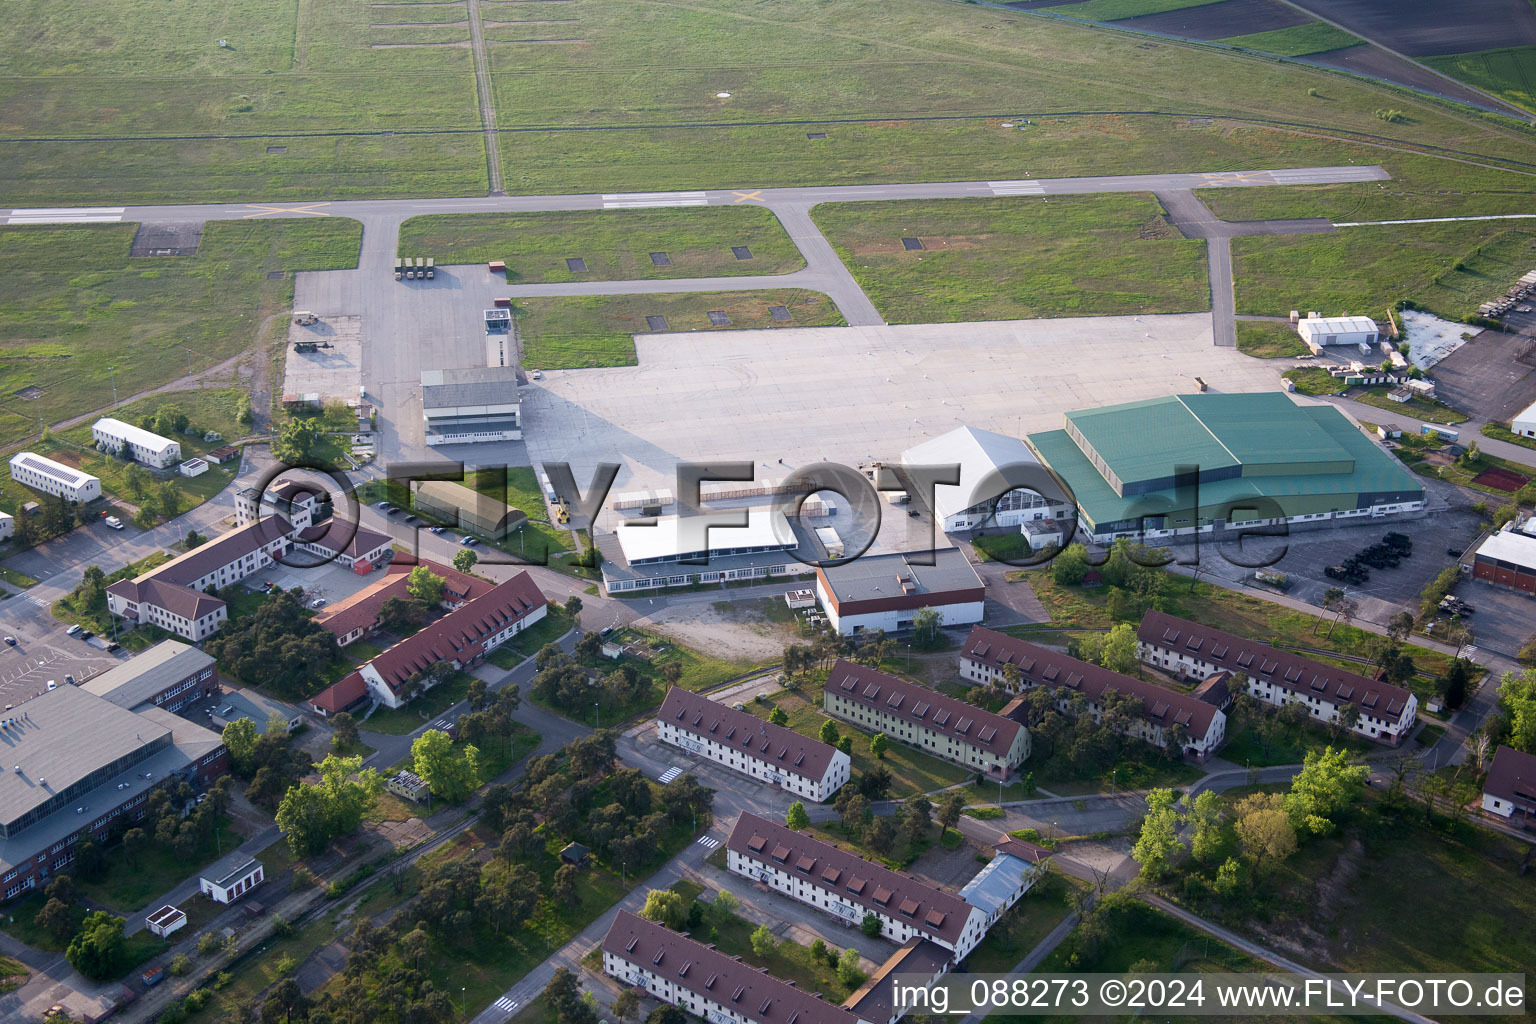 Aerial photograpy of Coleman Airfield in the district Sandhofen in Mannheim in the state Baden-Wuerttemberg, Germany